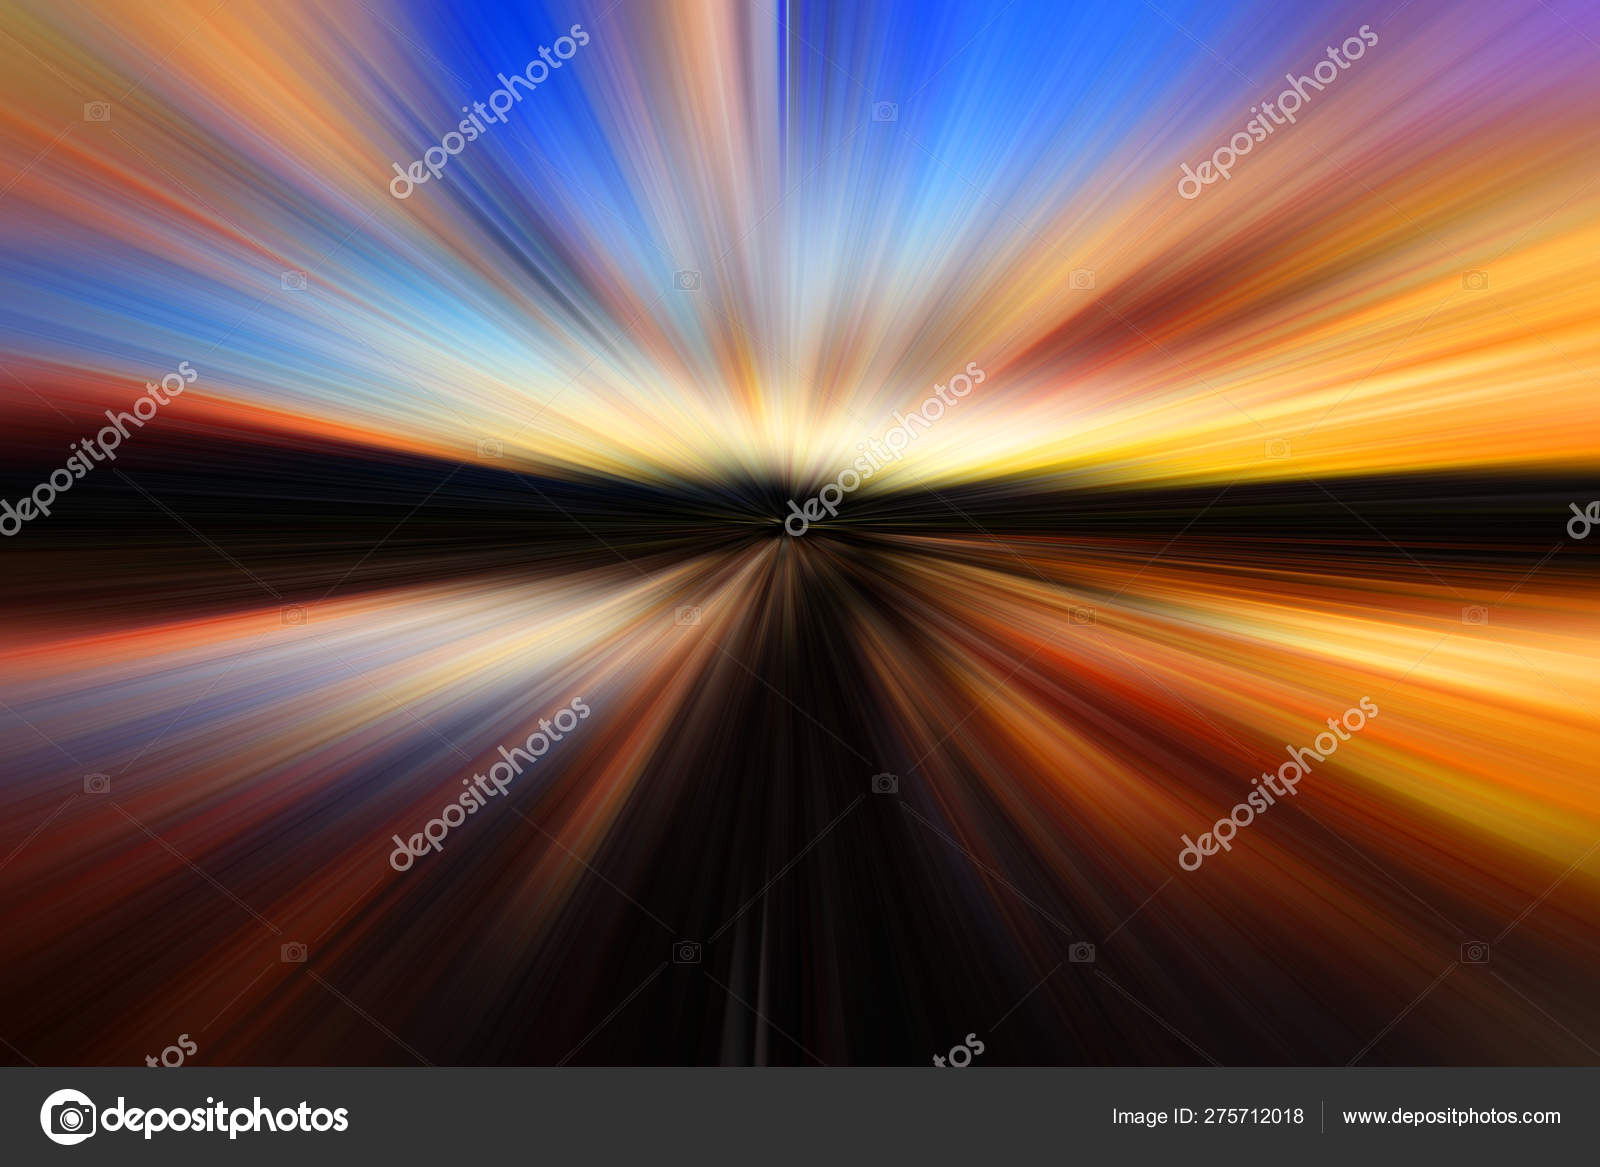 Abstract Zoom Blur Effect Background Stock Photo by ©macbrianmun 275712018